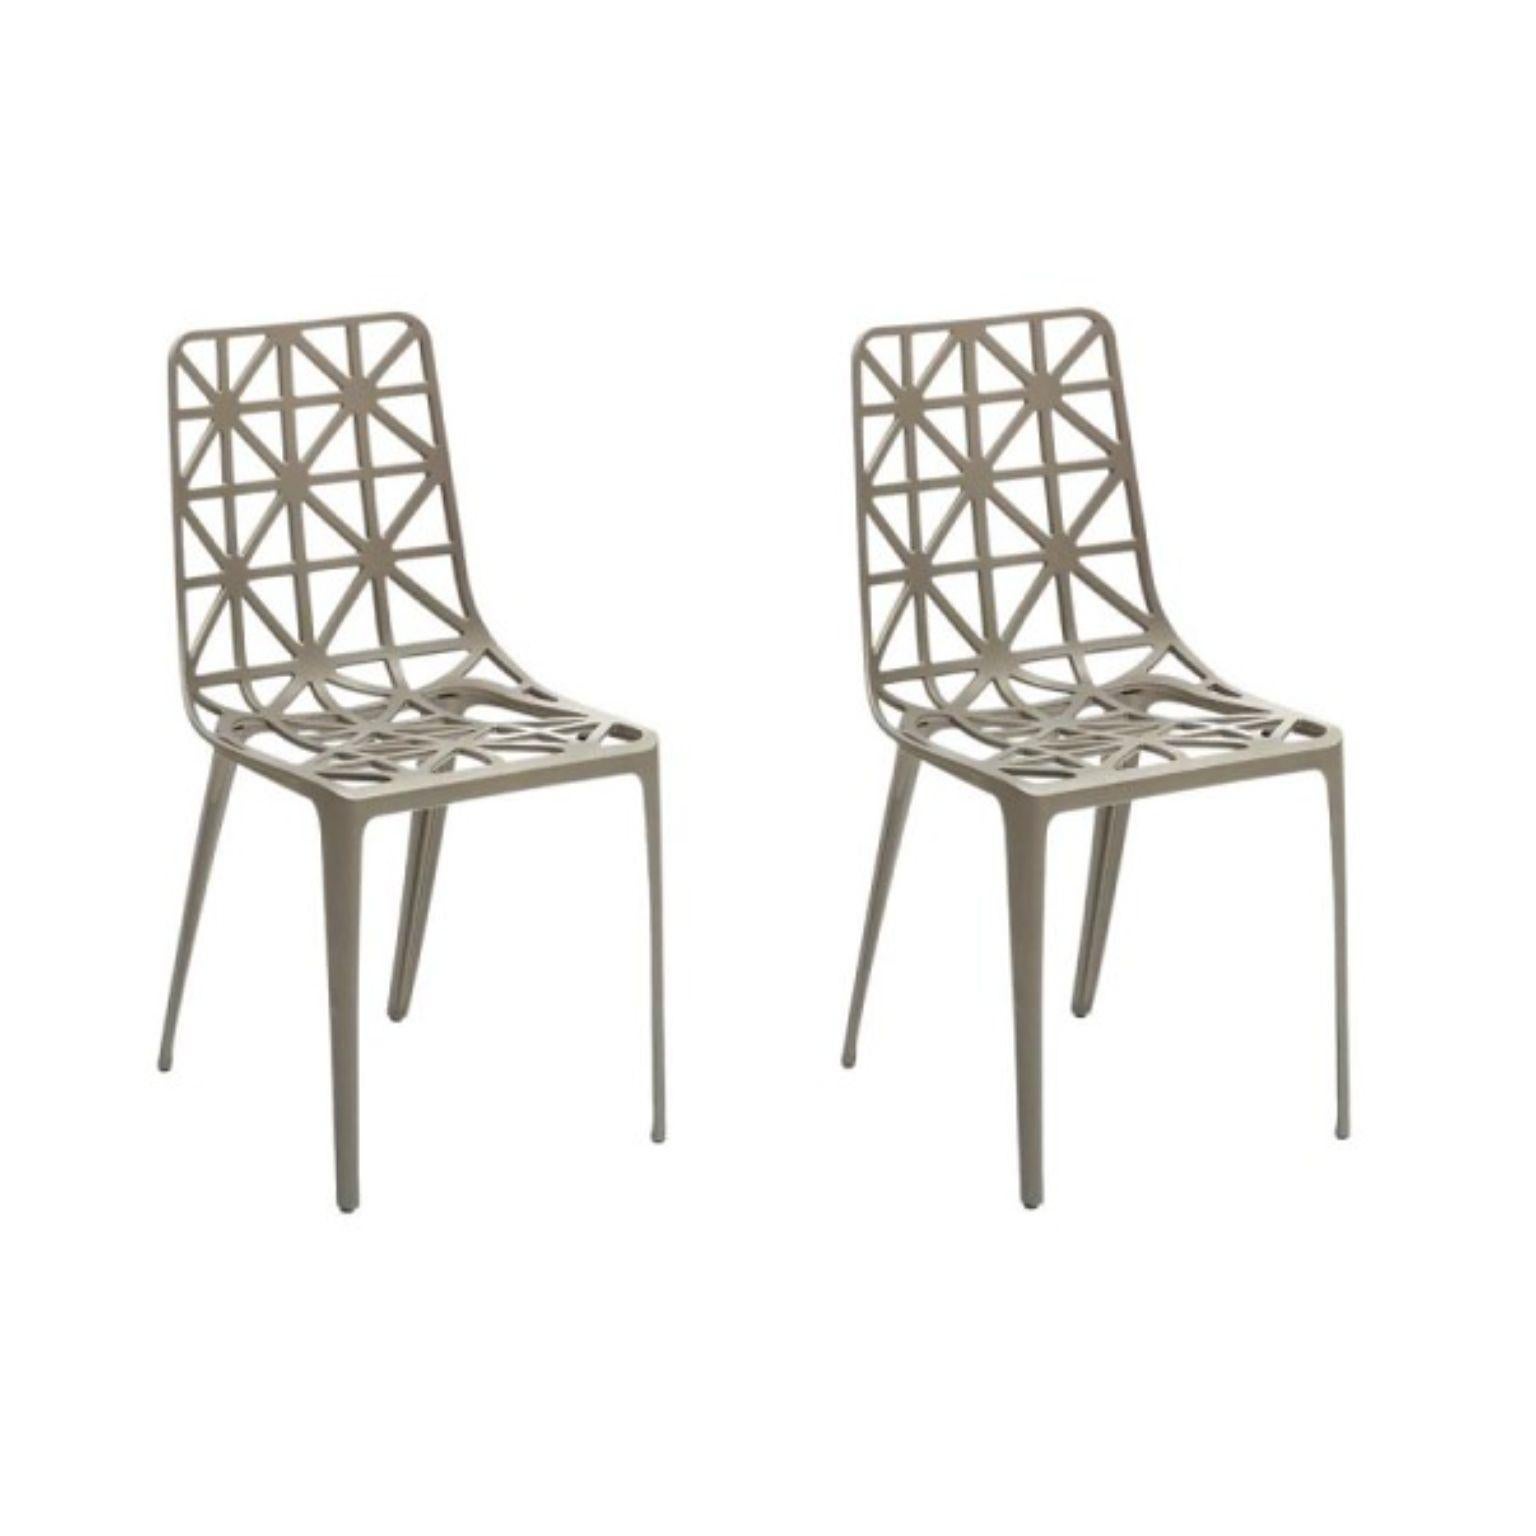 New eiffel tower chair by Alain Moatti
Materials: Structure in epoxy lacquered cast aluminum (suitable for outdoor and indoor)
Dimensions: D 41 x W 44 x H 88 cm
Available colors: Eiffel Tower, black, white, or aluminum, and red (indoor